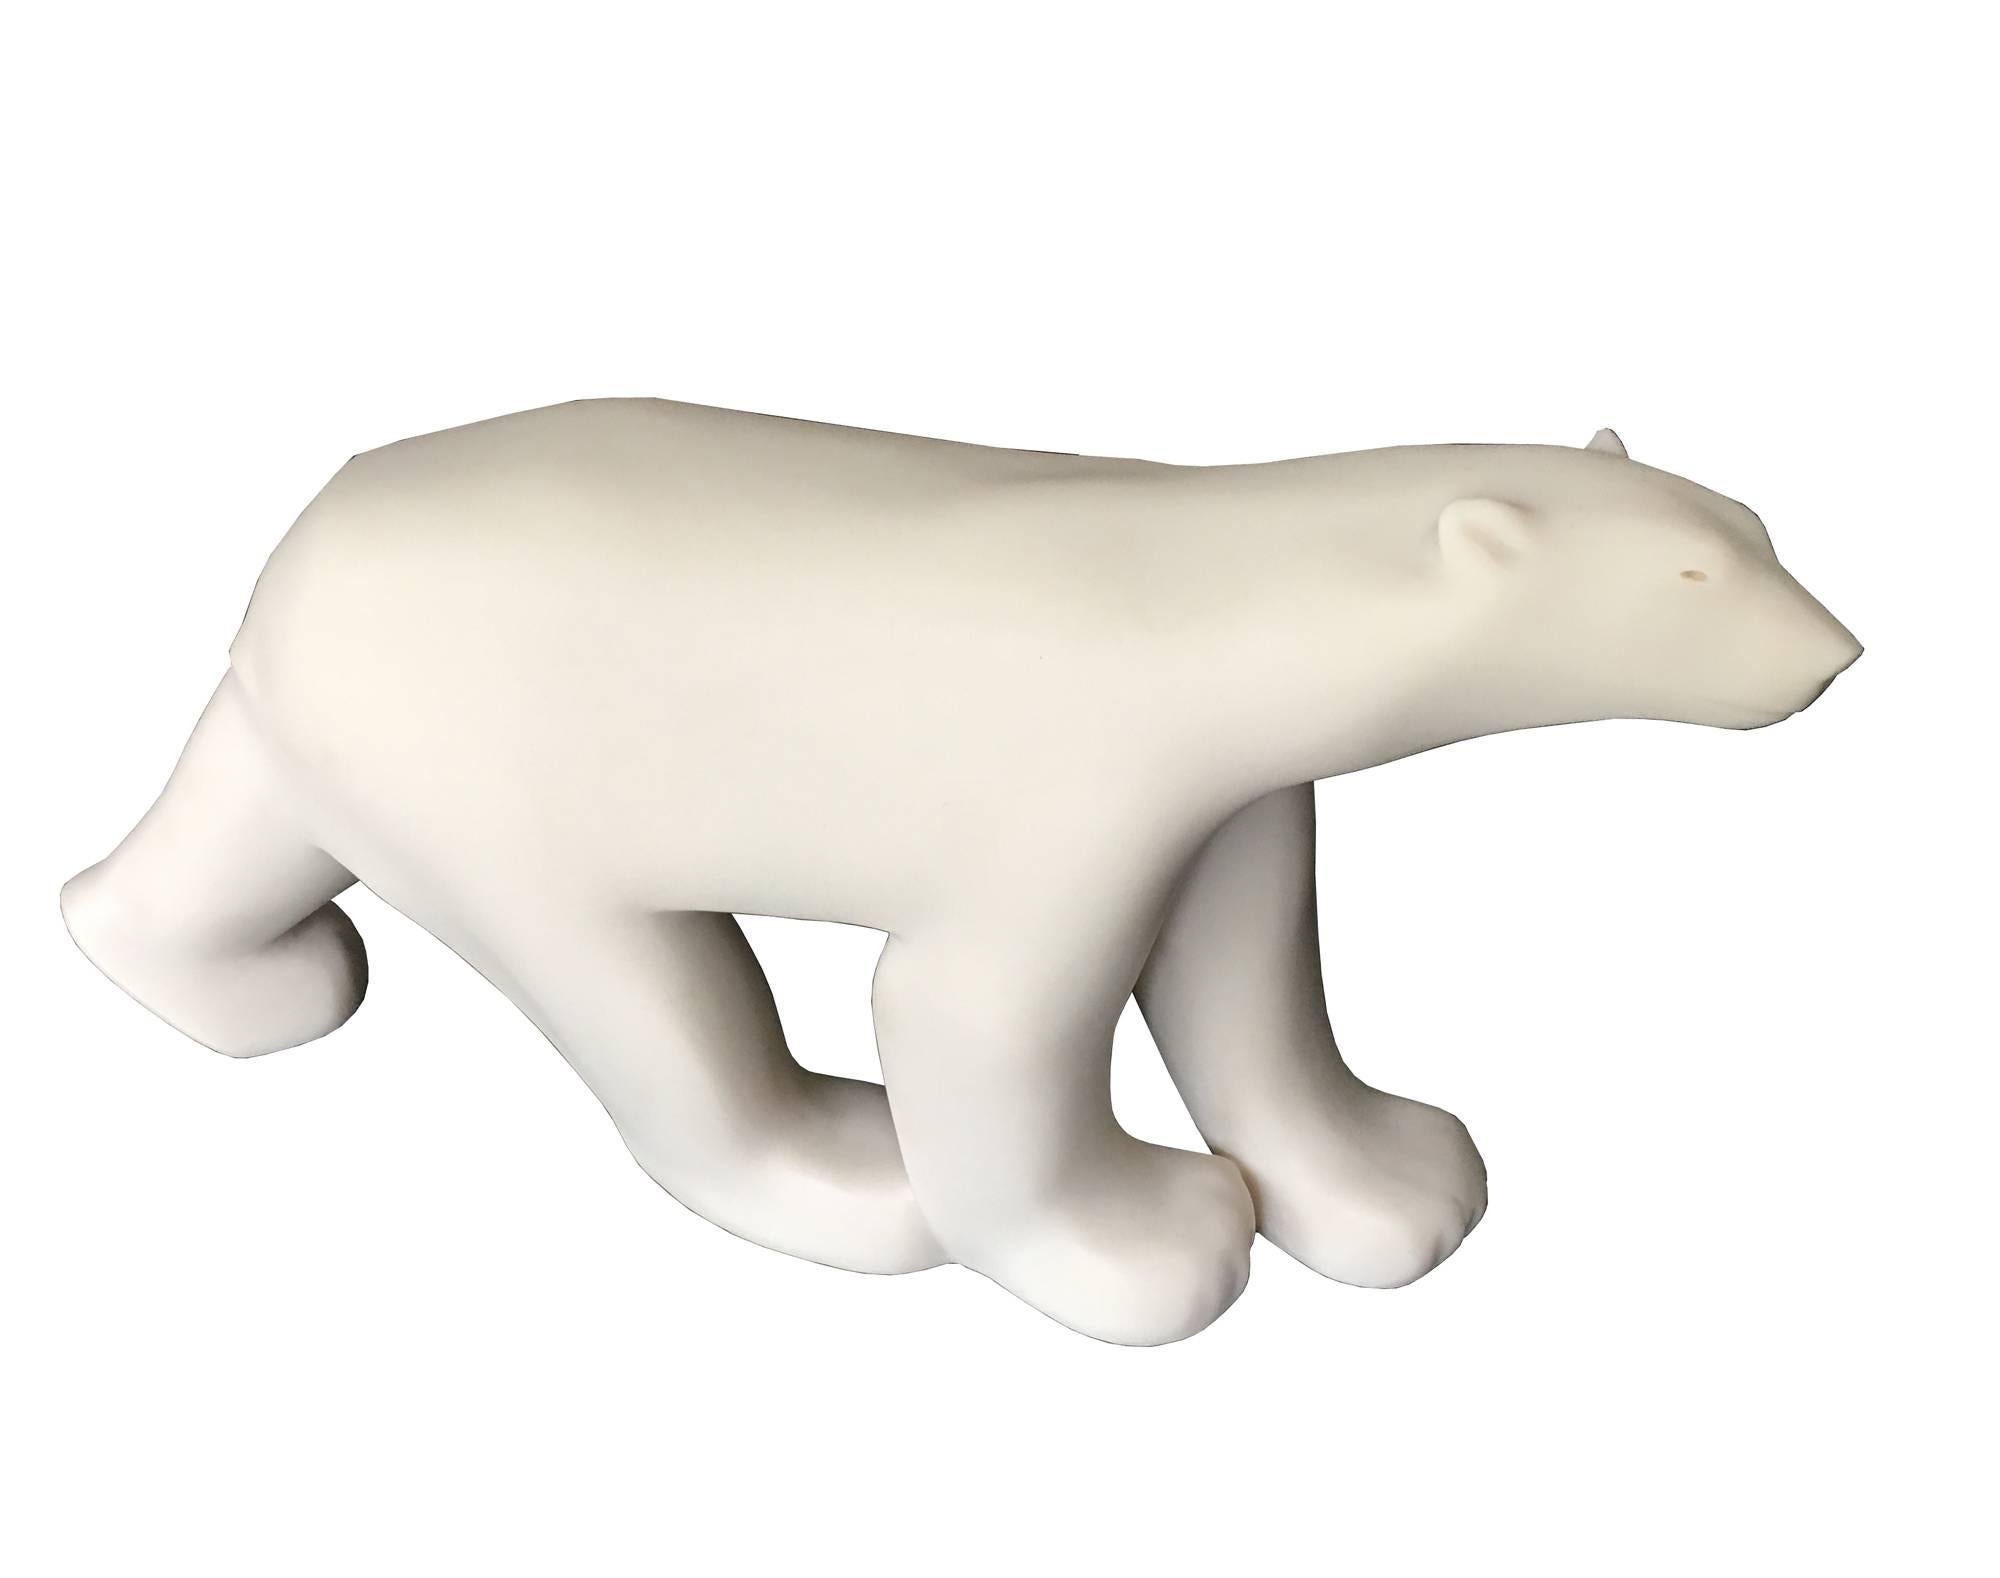 Franc¸ois Pompon: ‘Ours Blanc’ (Polar Bear), a fine Art Deco style reproduction of the original bronze.

This high quality cast marble reproduction is faithful to the later bronze castings in every way including dimensions.

24 cm high x 45 cm